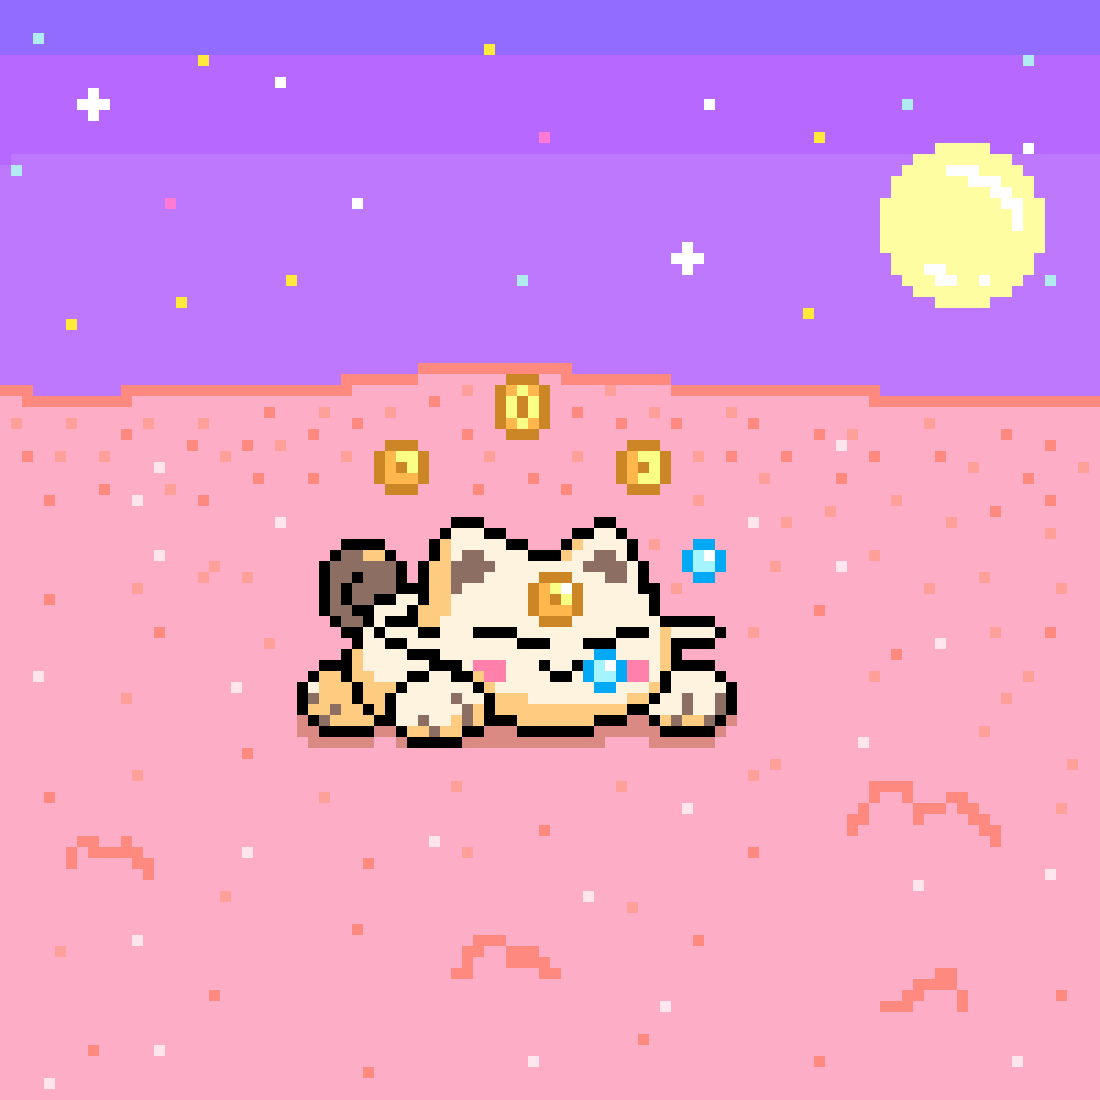 Arcade Healer I Got Up Super Early To Make This Beta Baby Meowth